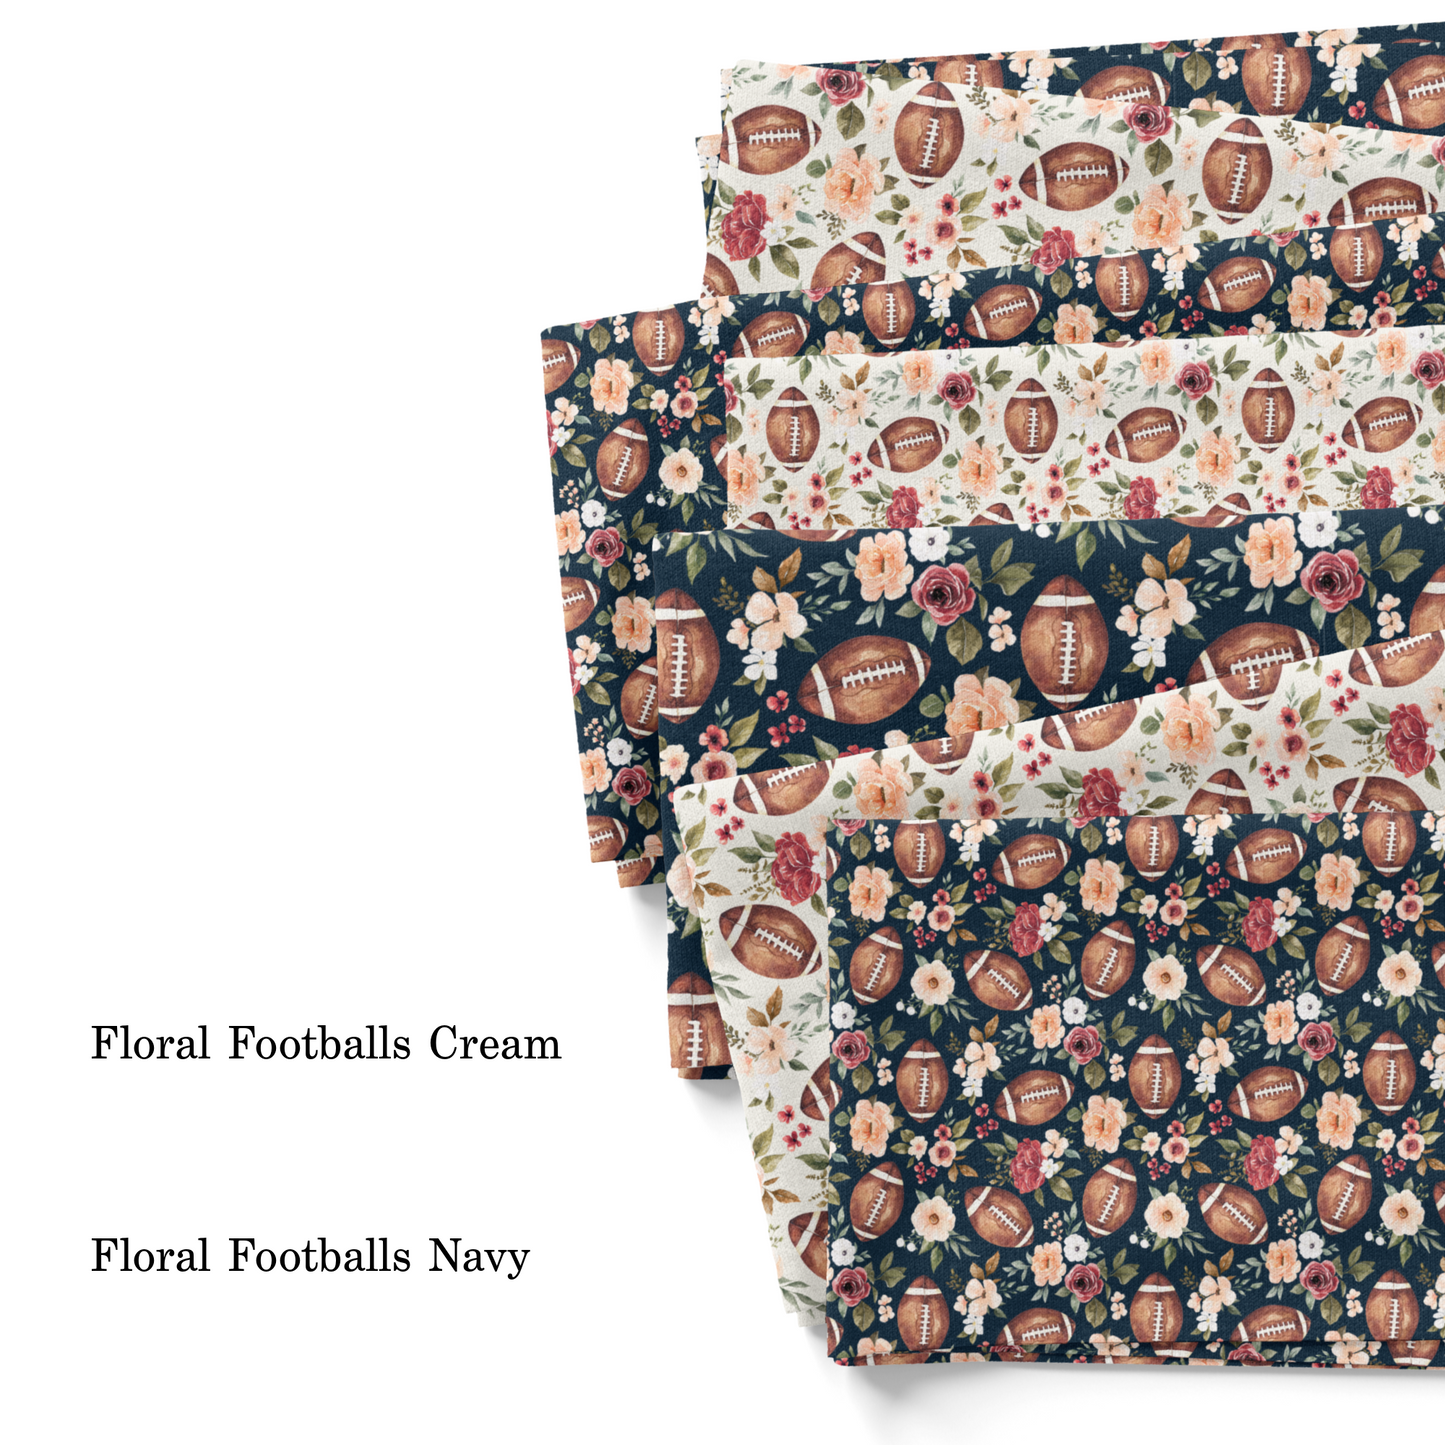 Floral Footballs Cream Fabric By The Yard